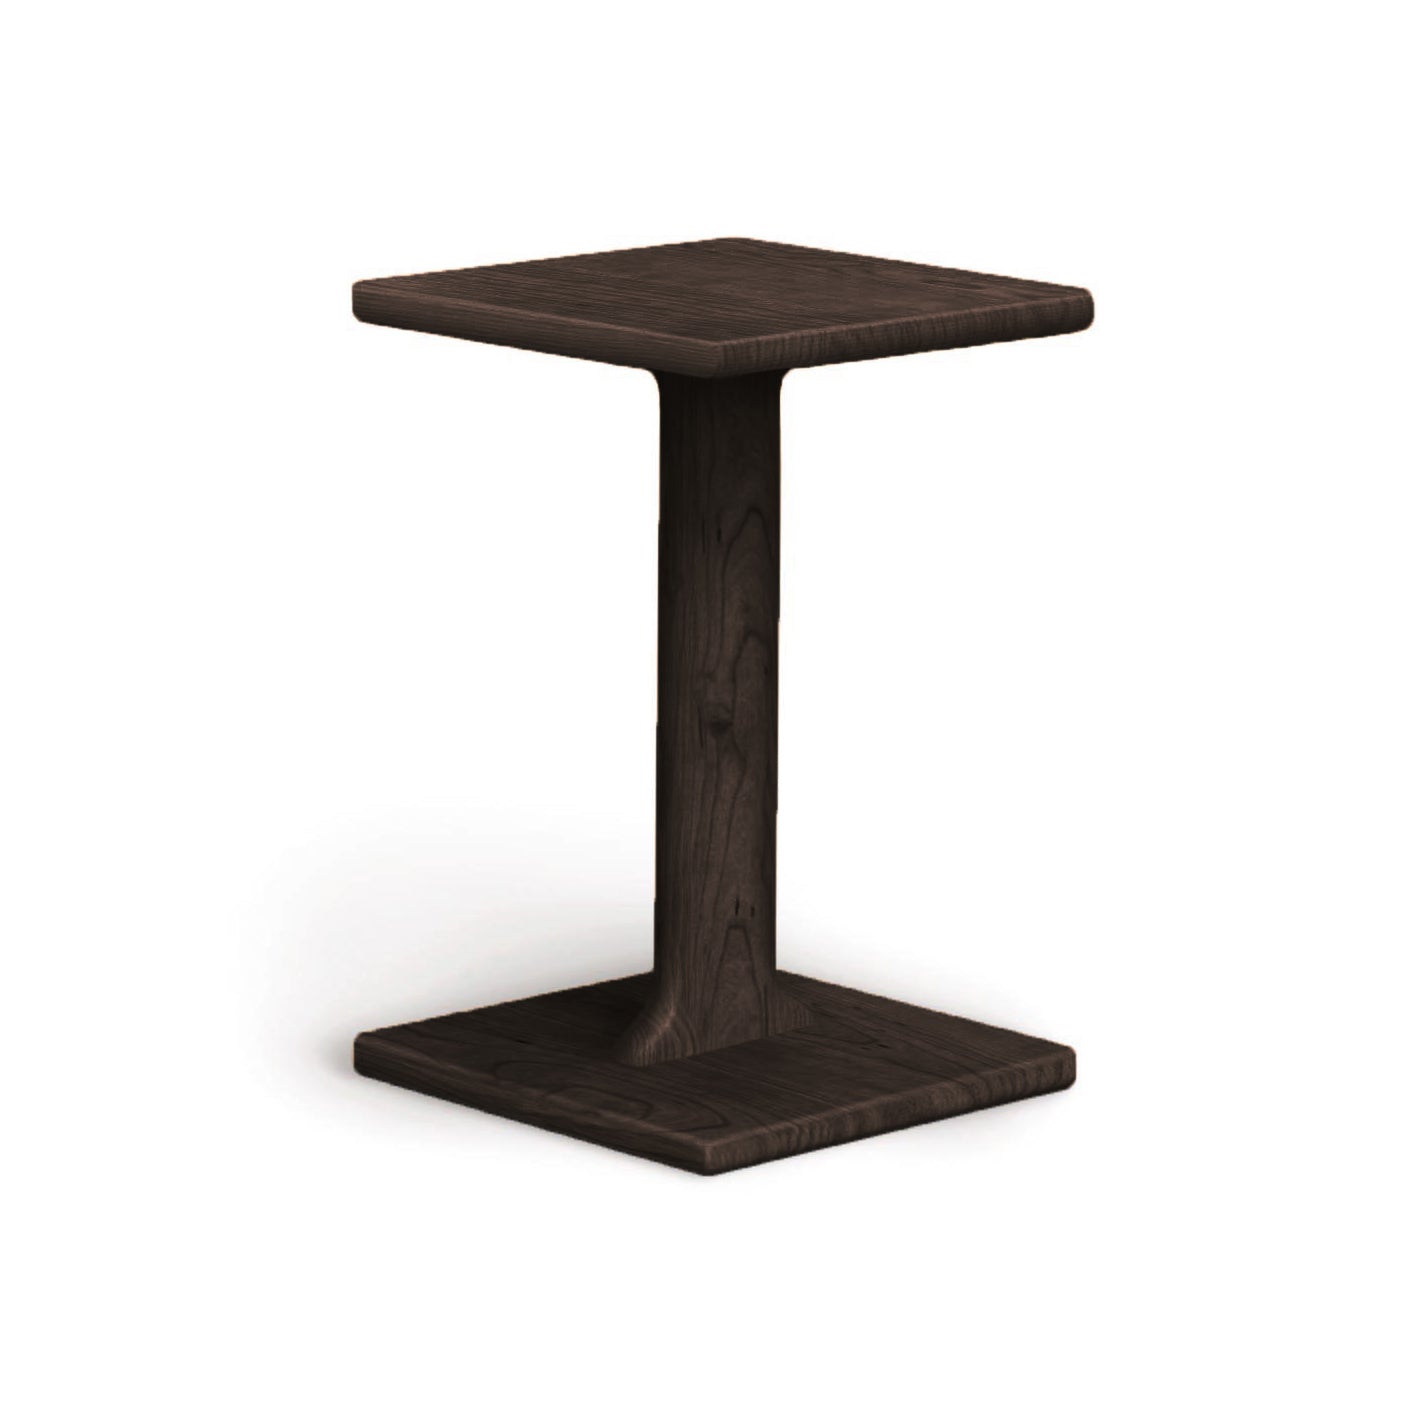 A simple, dark wood Sierra Chair Table with a square top and base, crafted from solid North American hardwood by Copeland Furniture, isolated on a white background.